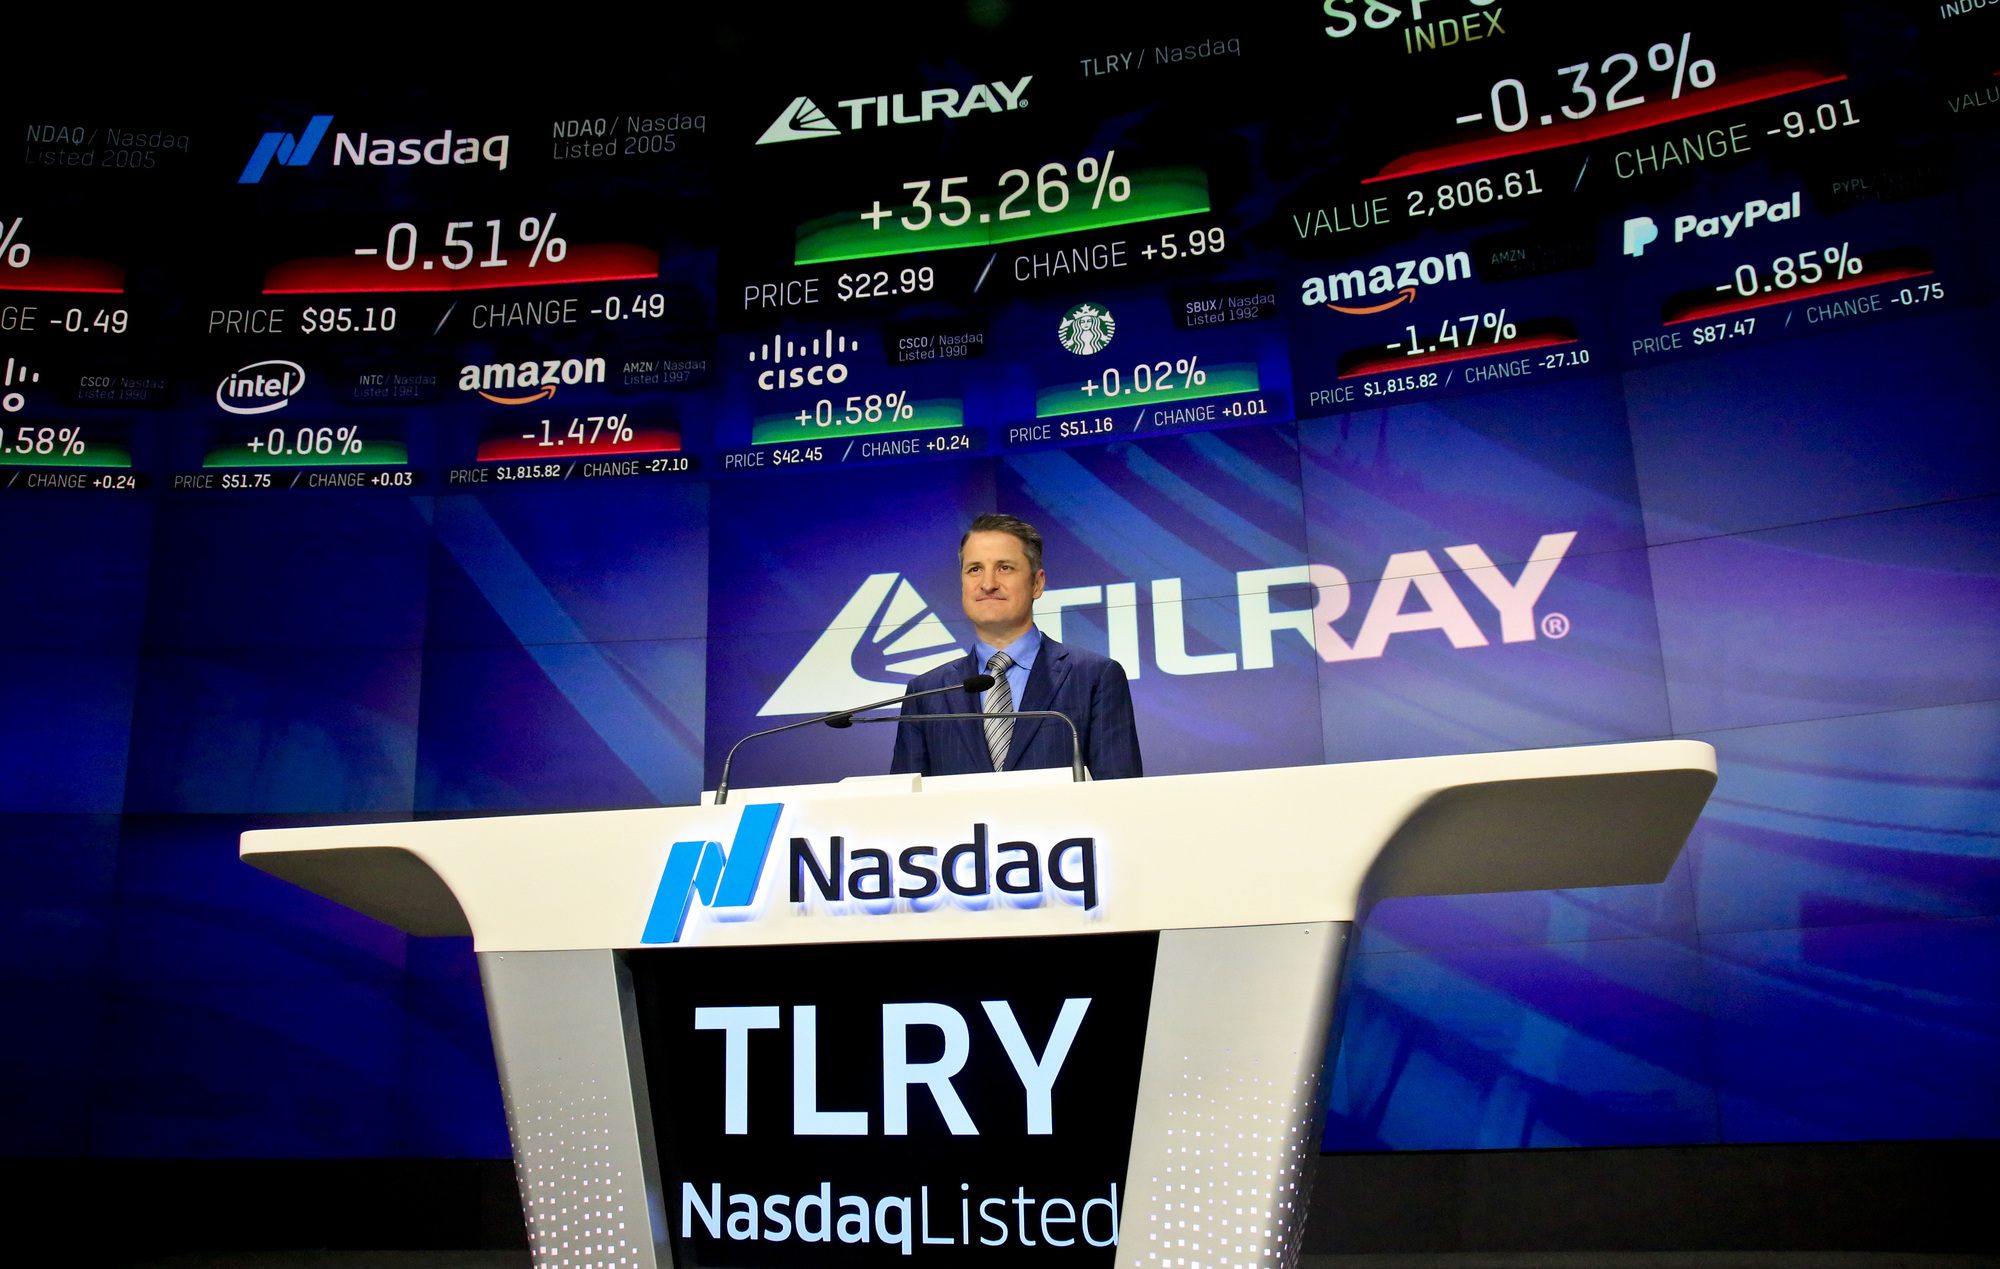 Investors Probably Didn’t Turn Their Backs on Tilray Cannabis Stocks Today